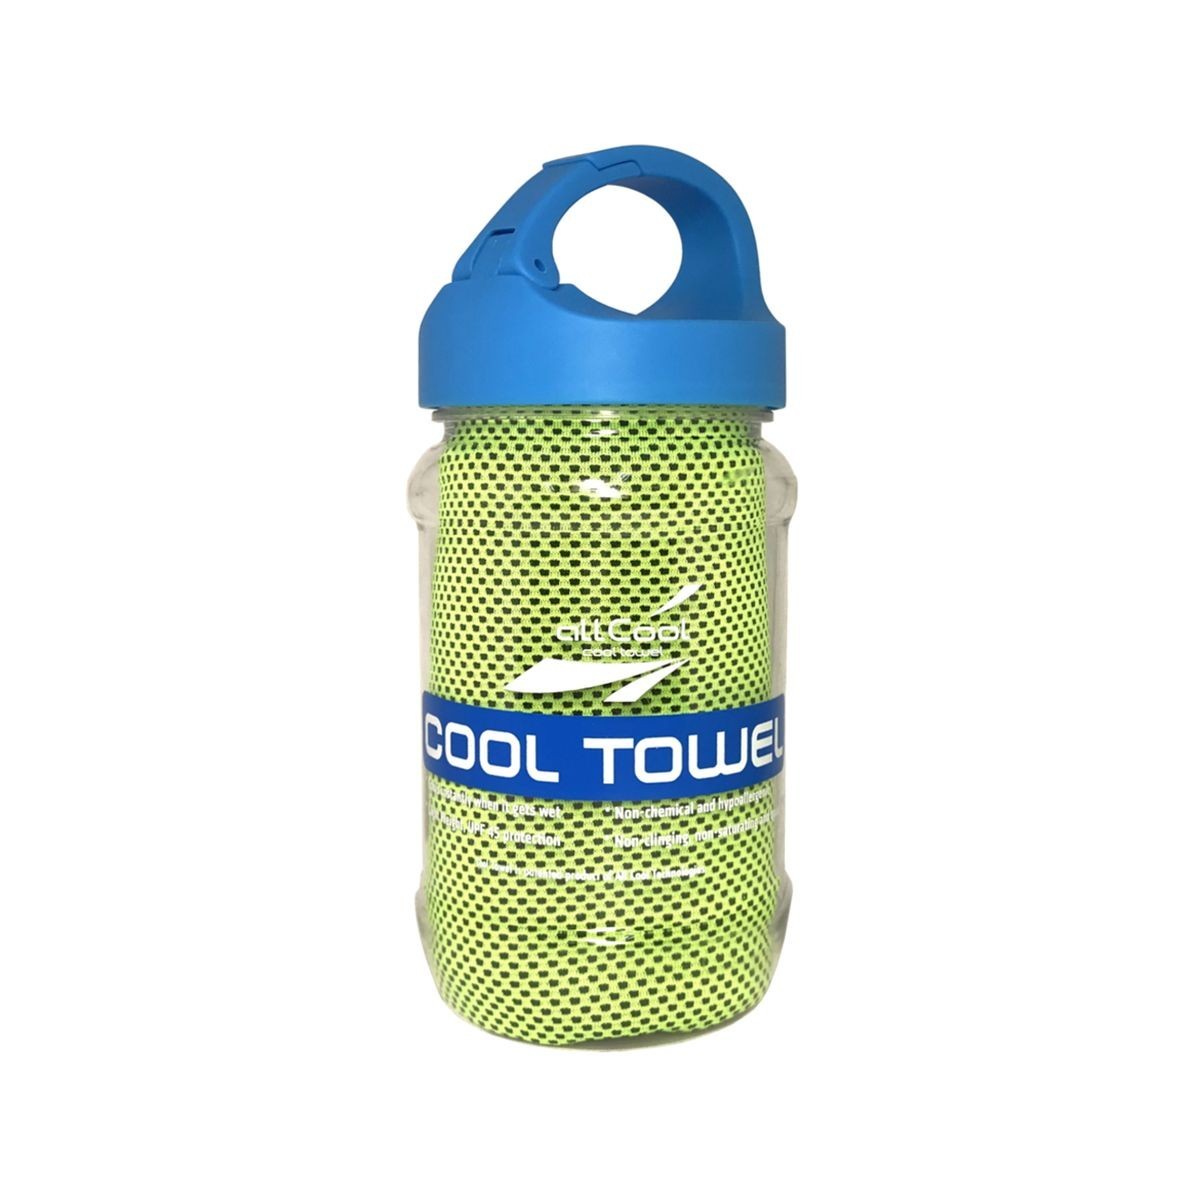  sport :all Cool COOL TOWEL cool towel CT001-GR(4) many times over possible to use .... cool towel sport / house tore/ home tore/ Ran / Jog / yoga / Jim / training /...